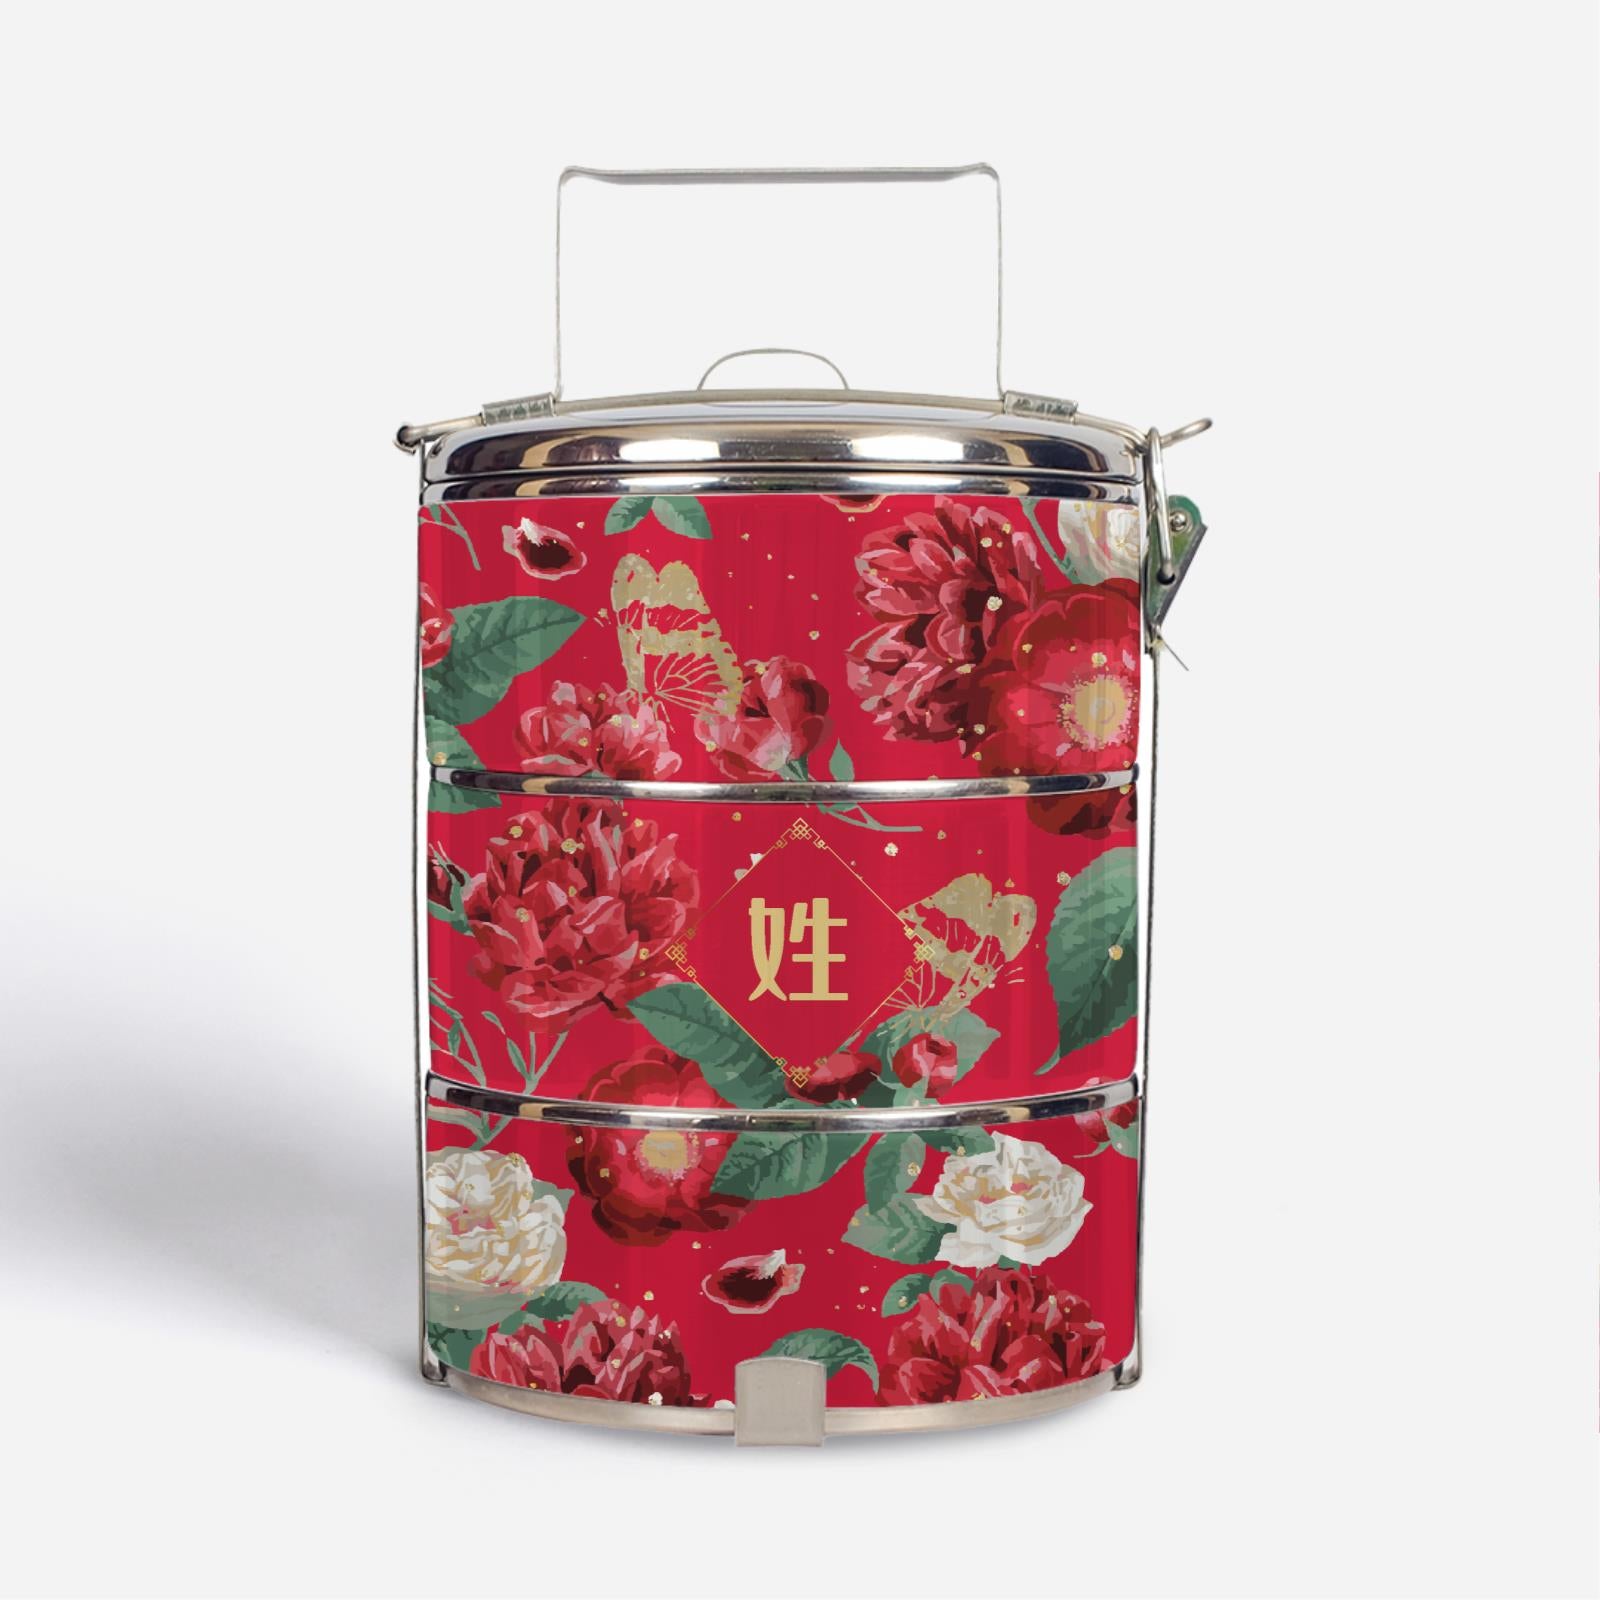 Royal Floral Series With Chinese Surname Standard Tiffin Carrier - Scorching Passion